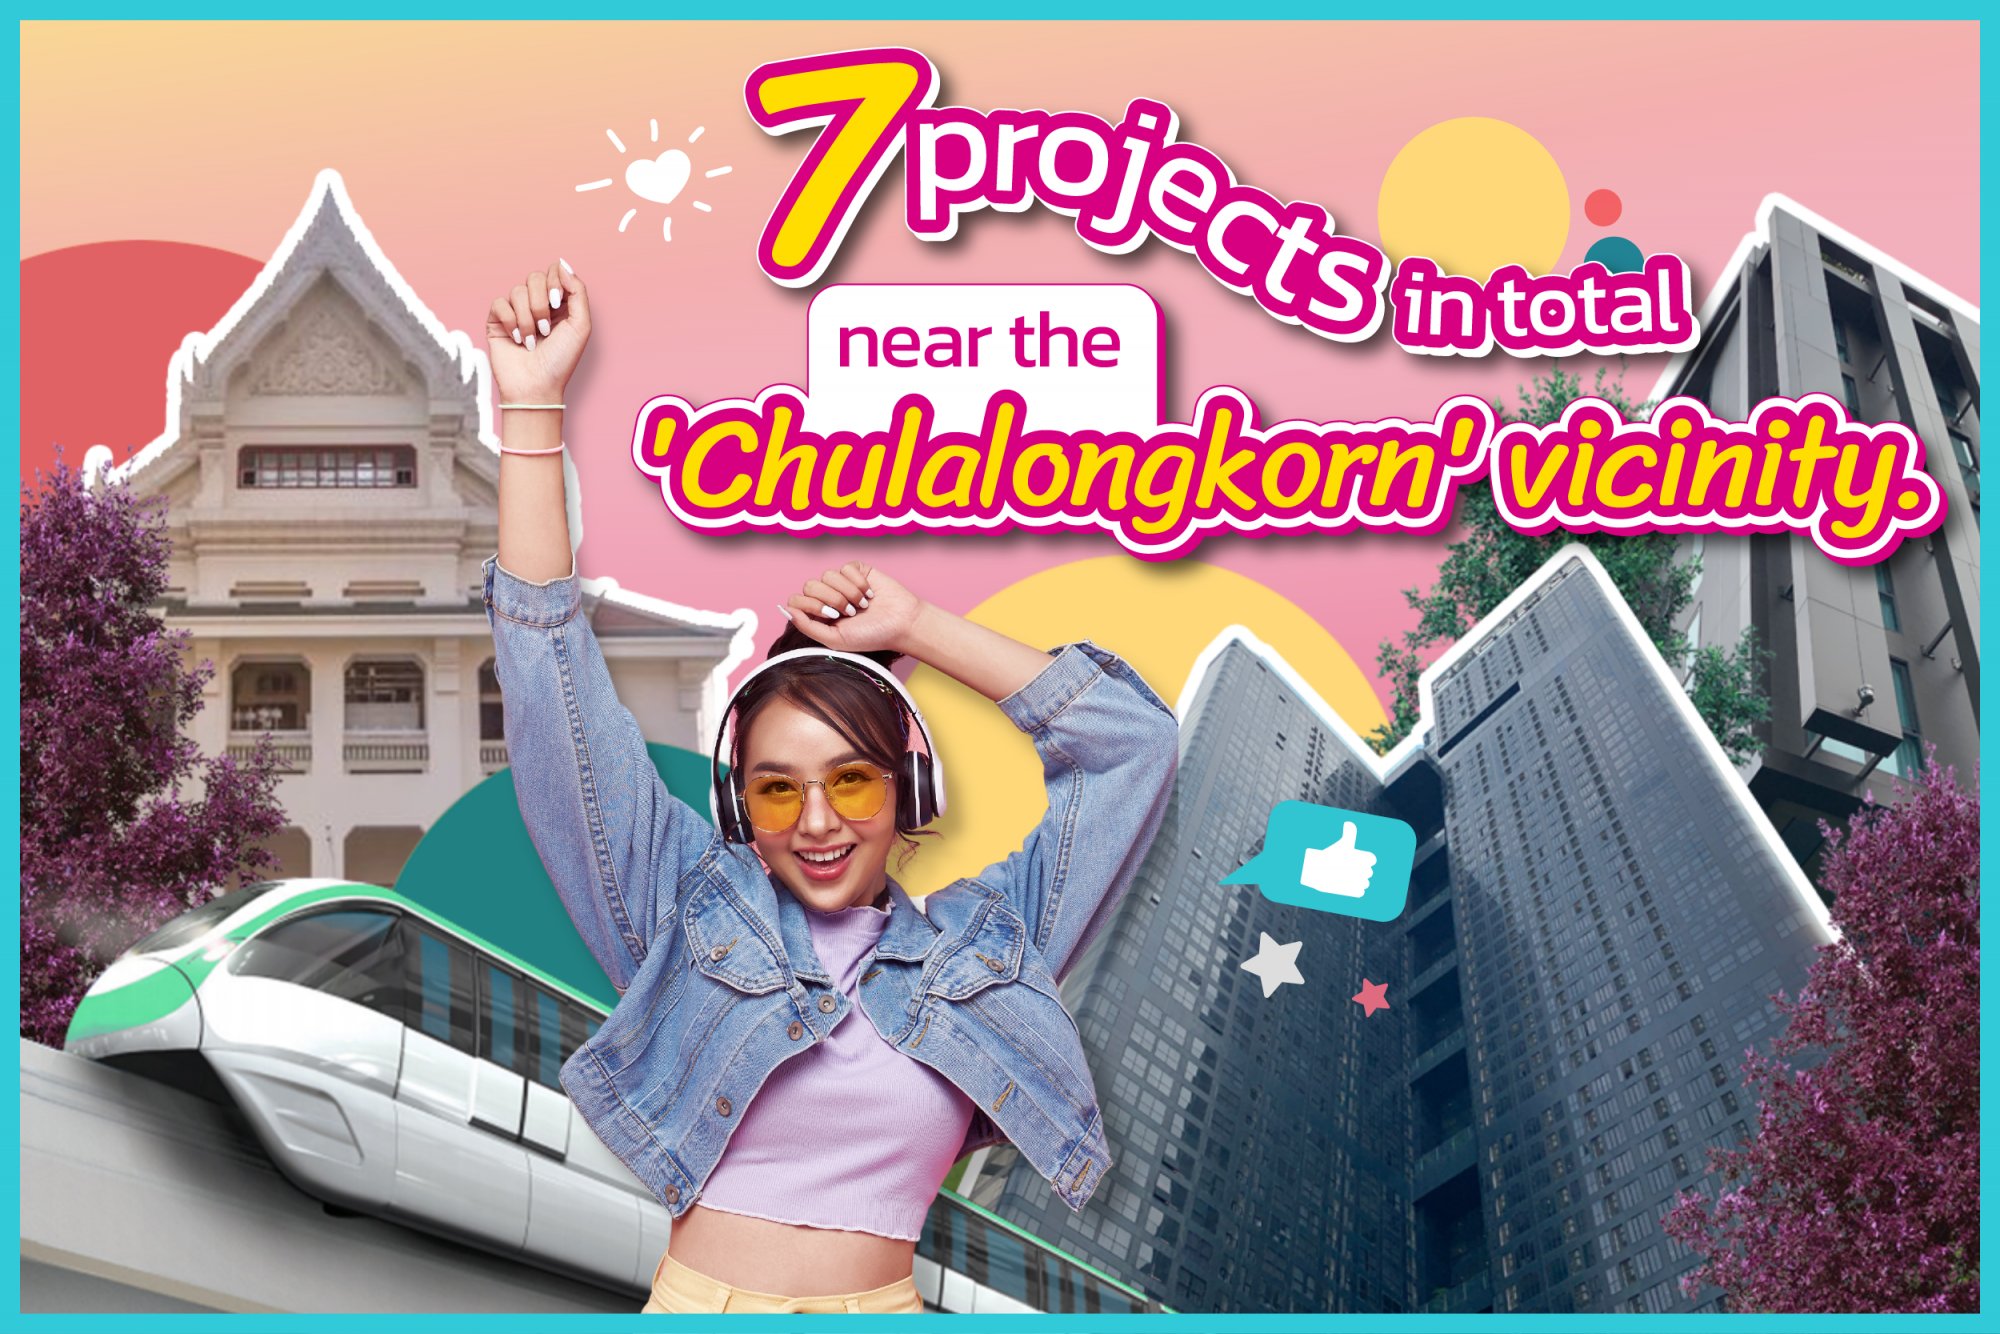 image for 7 projects in total, near the 'Chulalongkorn' vicinity.